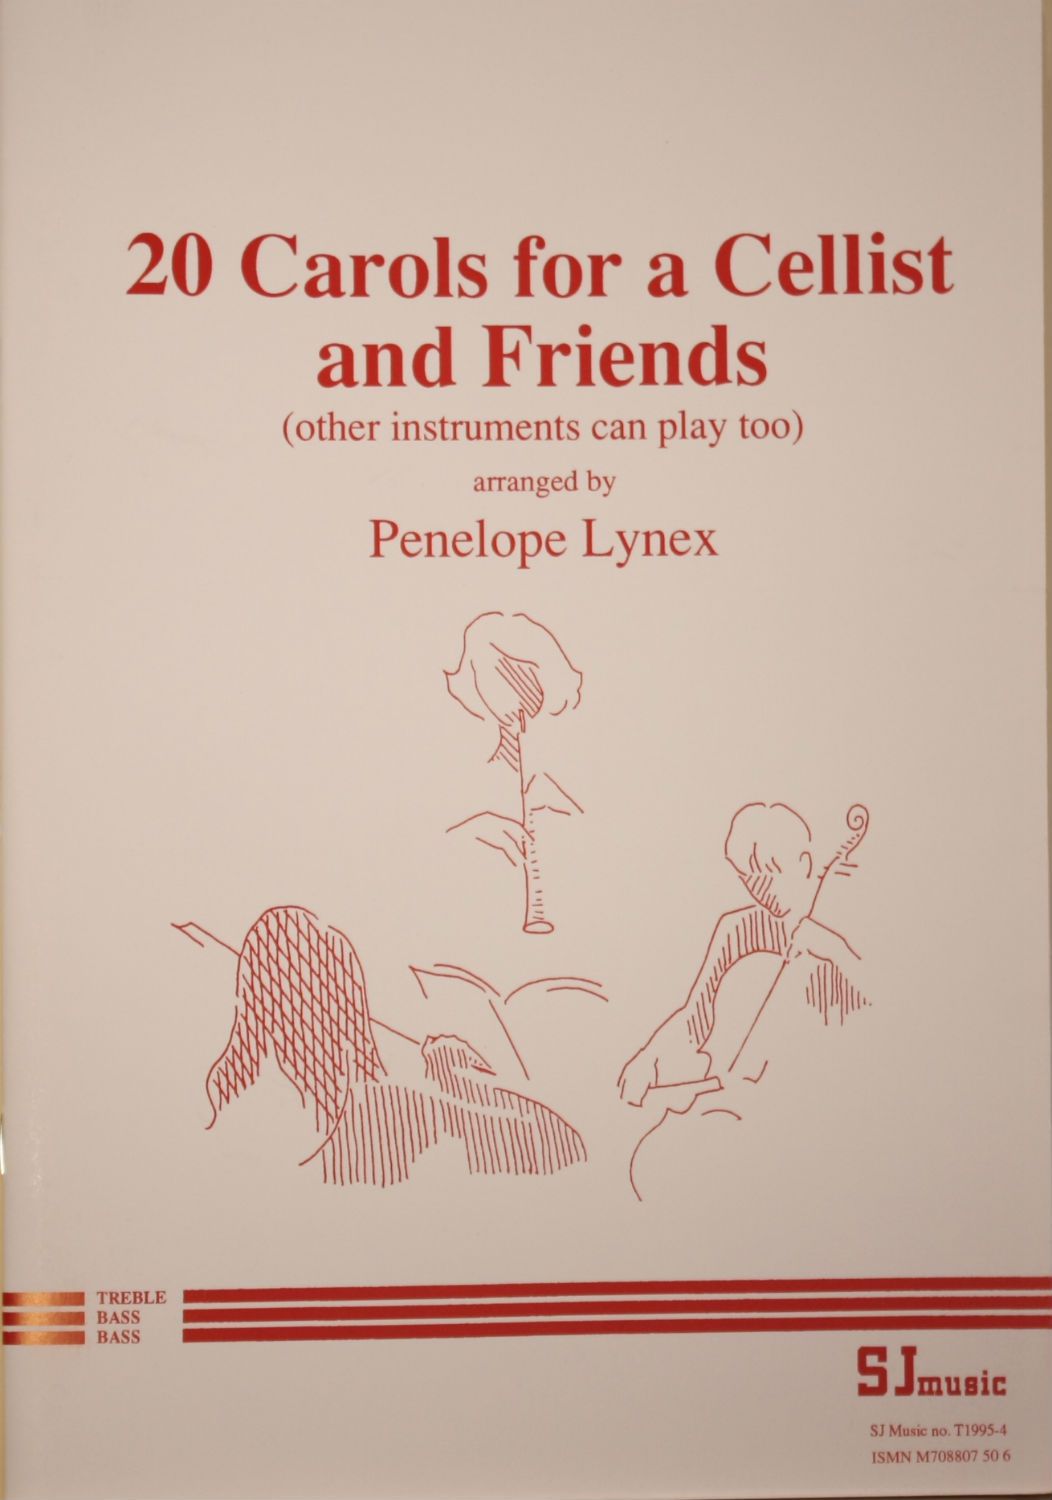 20 Carols for a Cellist and Friends